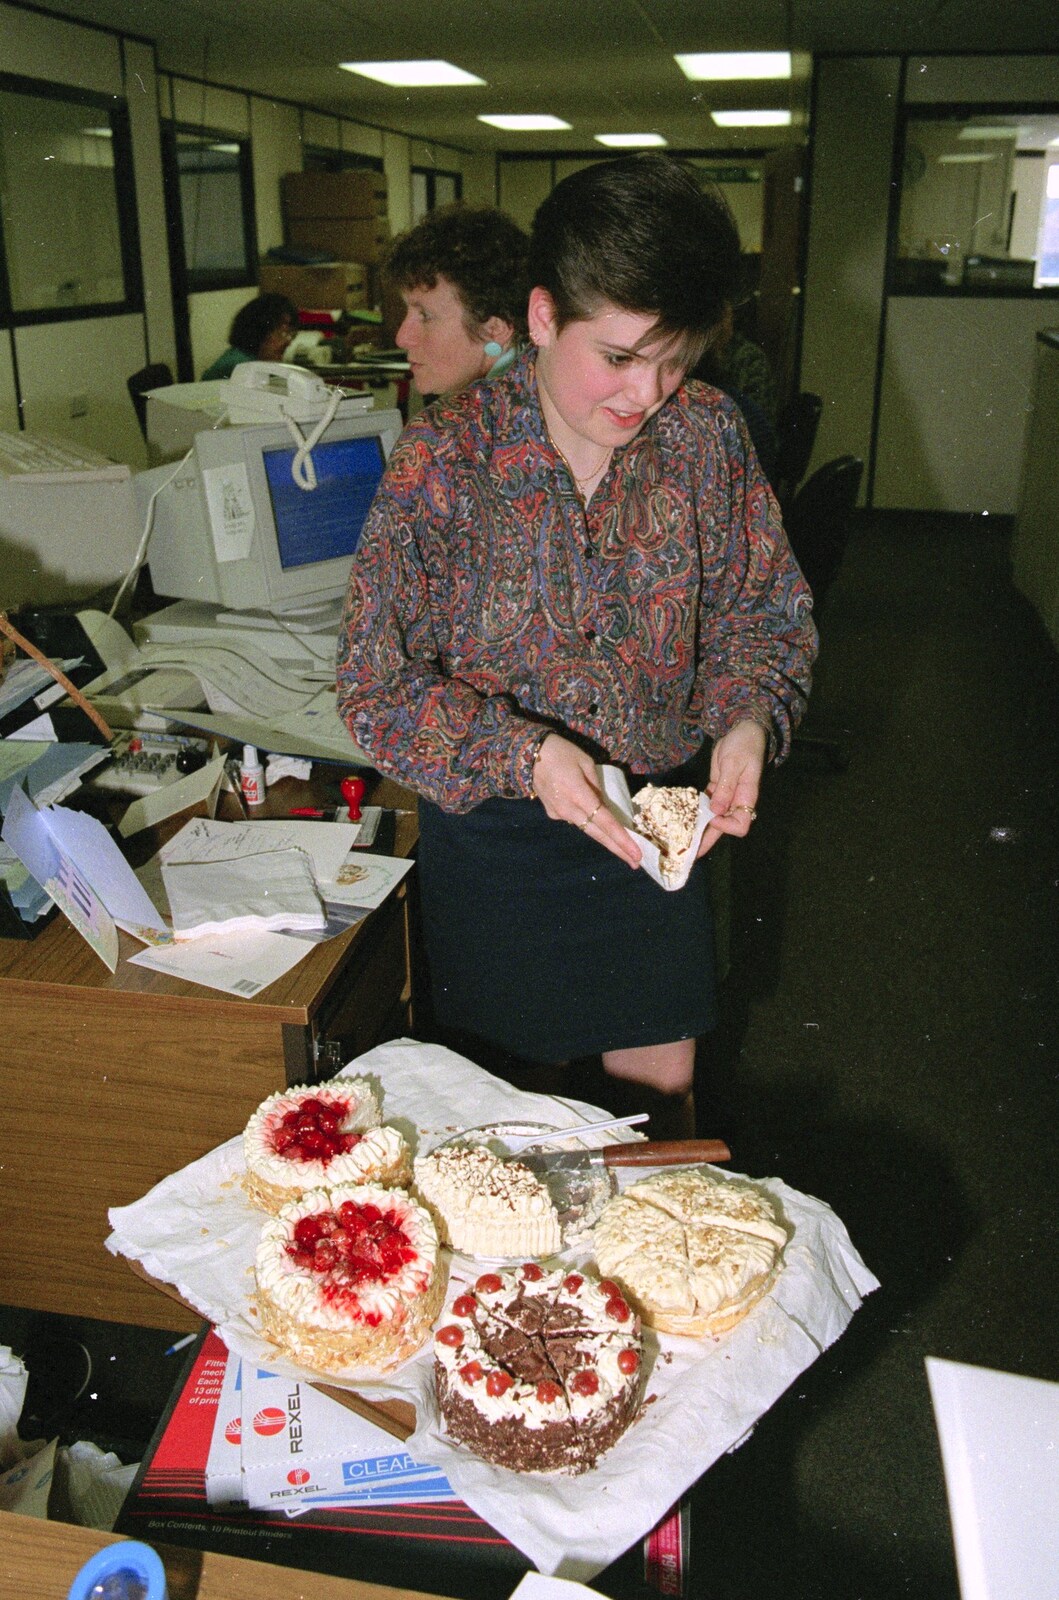 Kelly in the office from Kelly's Printec Birthday, Roydon, Norfolk - 2nd May 1990